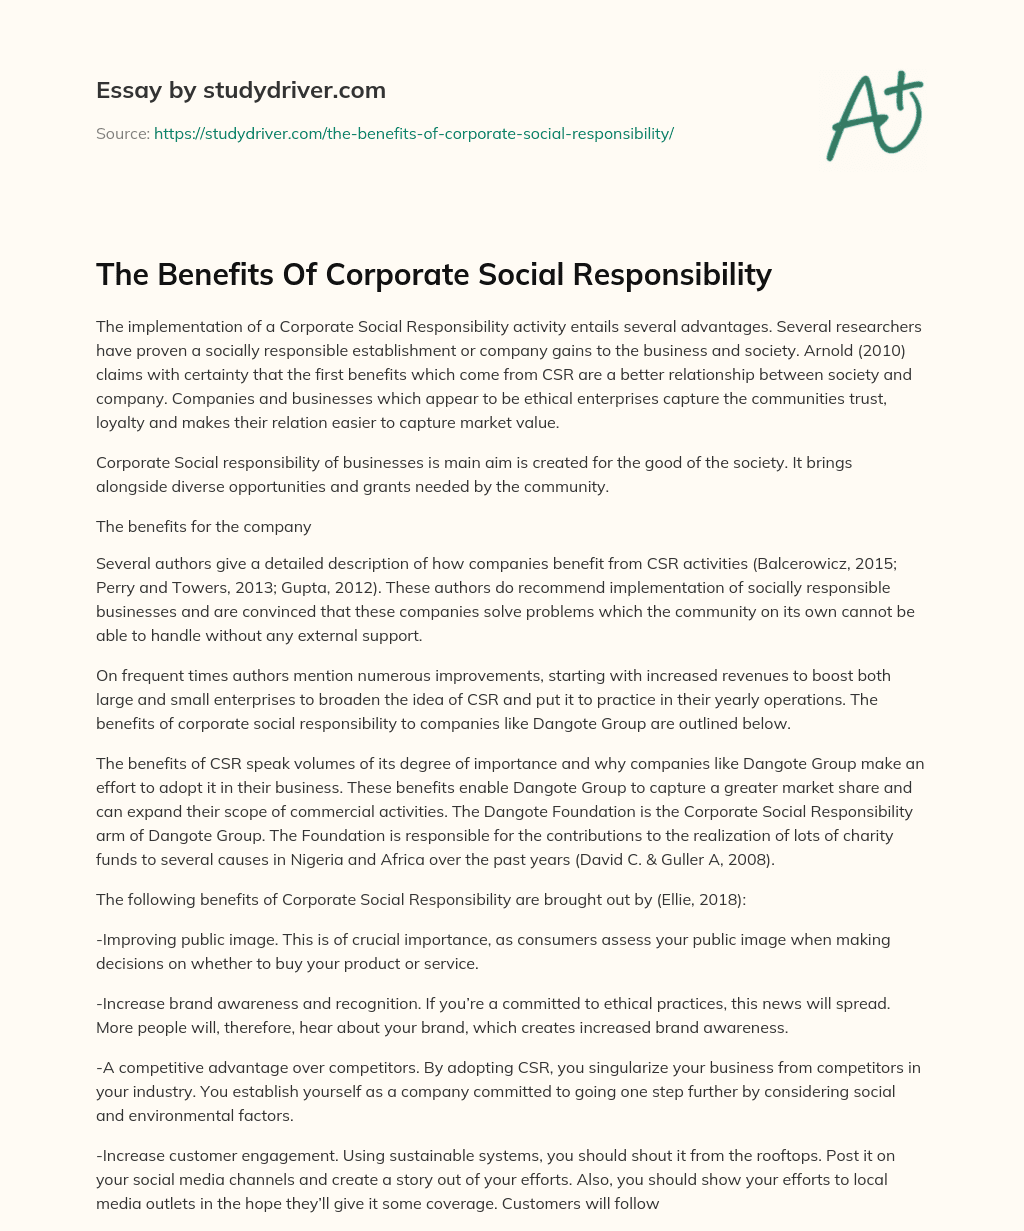 The Benefits of Corporate Social Responsibility  essay